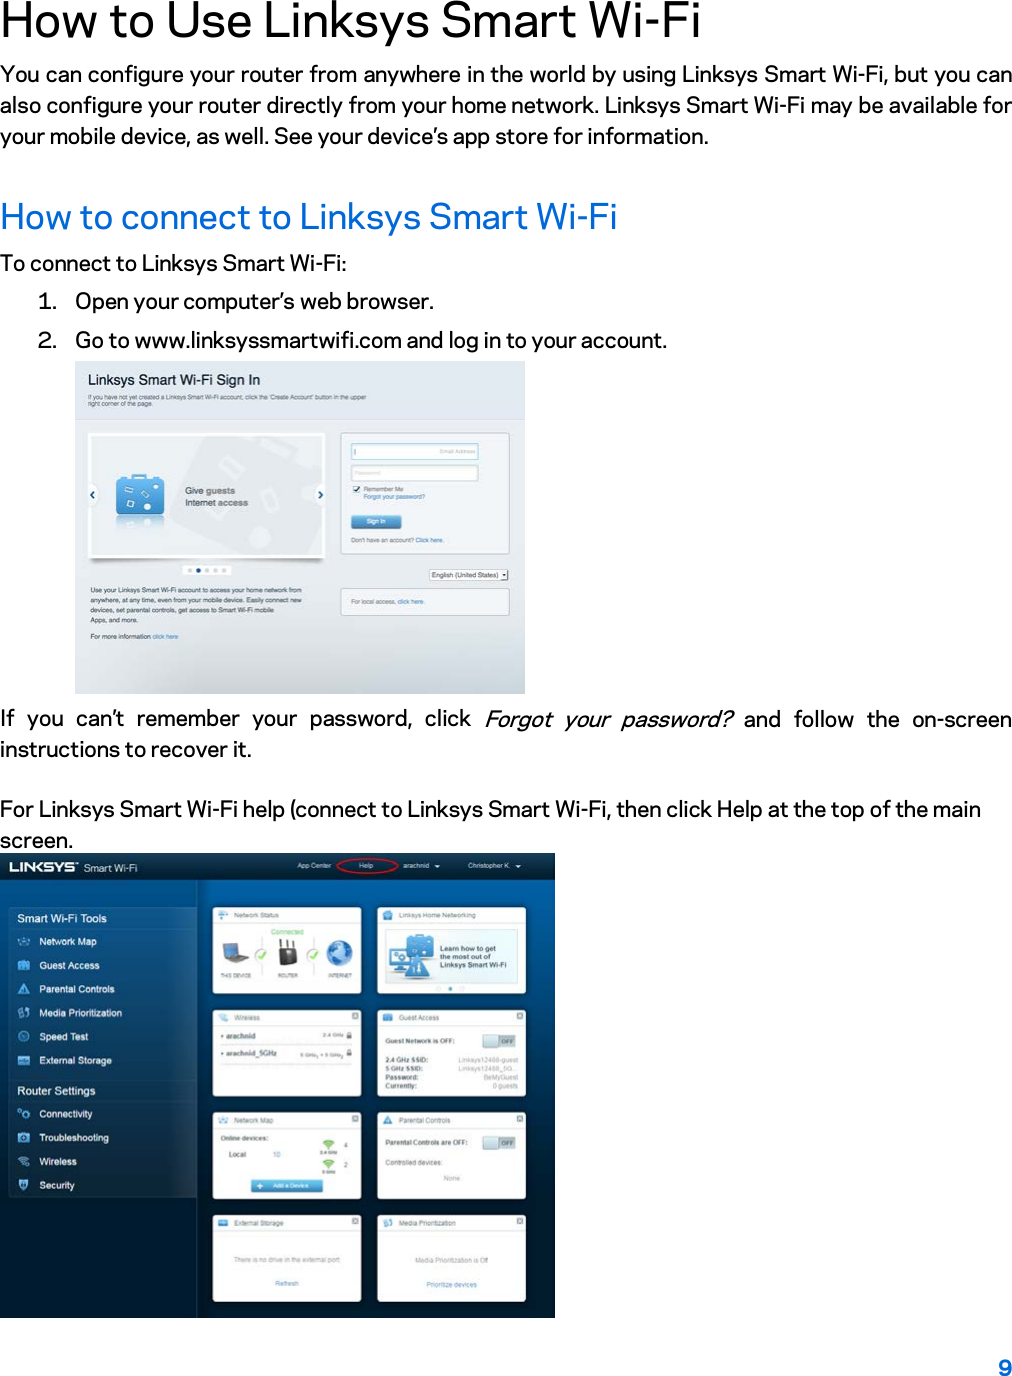 9  How to Use Linksys Smart Wi-Fi You can configure your router from anywhere in the world by using Linksys Smart Wi-Fi, but you can also configure your router directly from your home network. Linksys Smart Wi-Fi may be available for your mobile device, as well. See your device’s app store for information. How to connect to Linksys Smart Wi-Fi To connect to Linksys Smart Wi-Fi: 1. Open your computer’s web browser. 2. Go to www.linksyssmartwifi.com and log in to your account.   If you can’t remember your password, click Forgot your password? and follow the on-screen instructions to recover it.  For Linksys Smart Wi-Fi help (connect to Linksys Smart Wi-Fi, then click Help at the top of the main screen.   